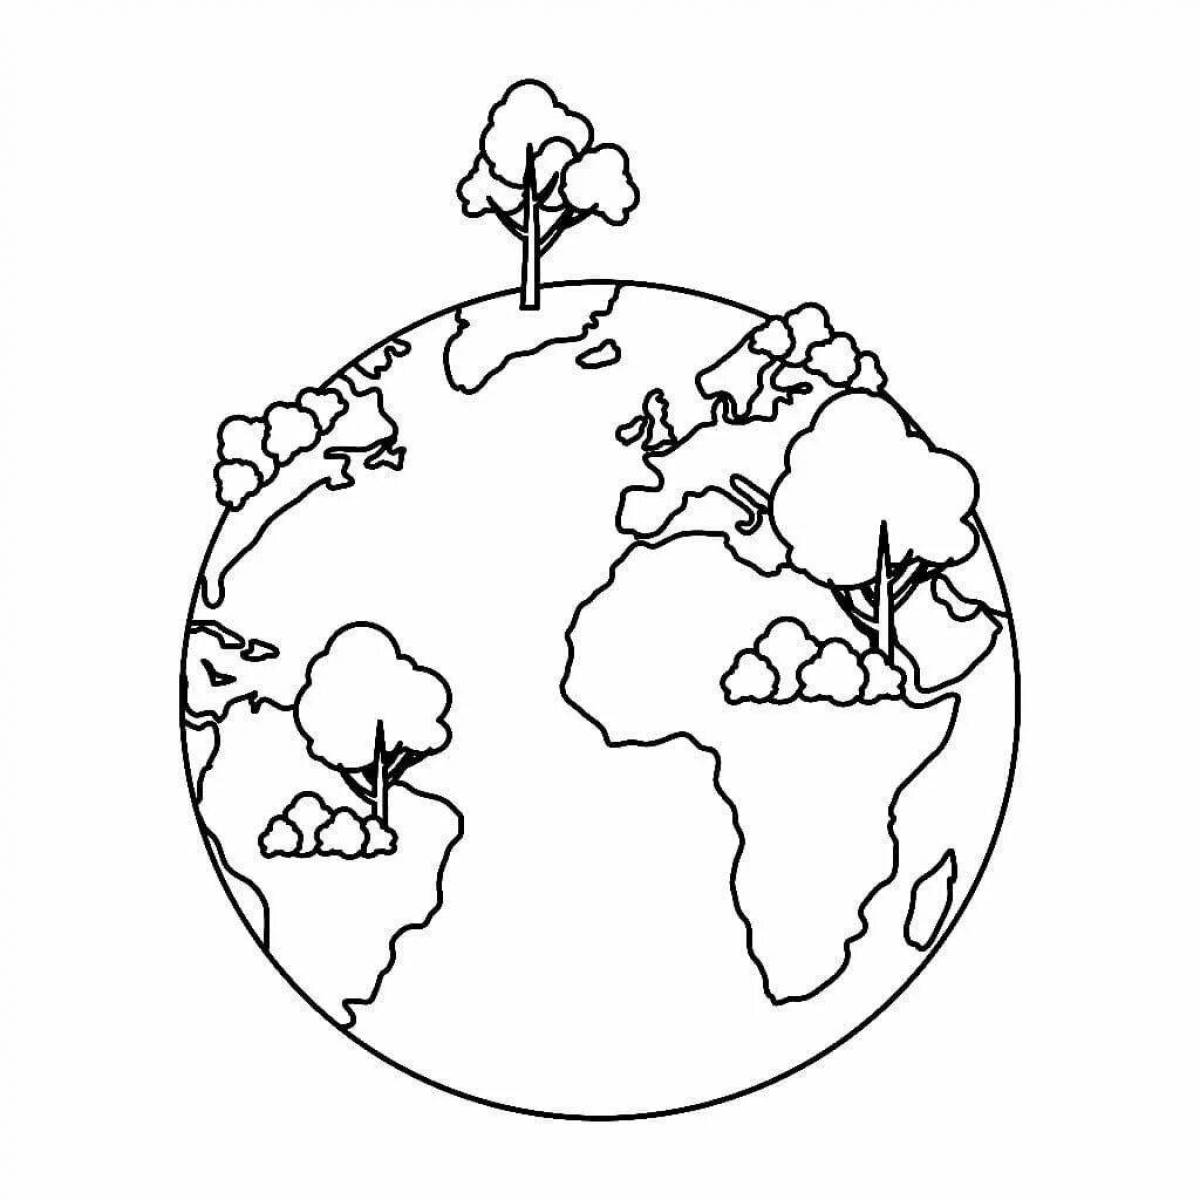 Creative globe coloring book for 6-7 year olds